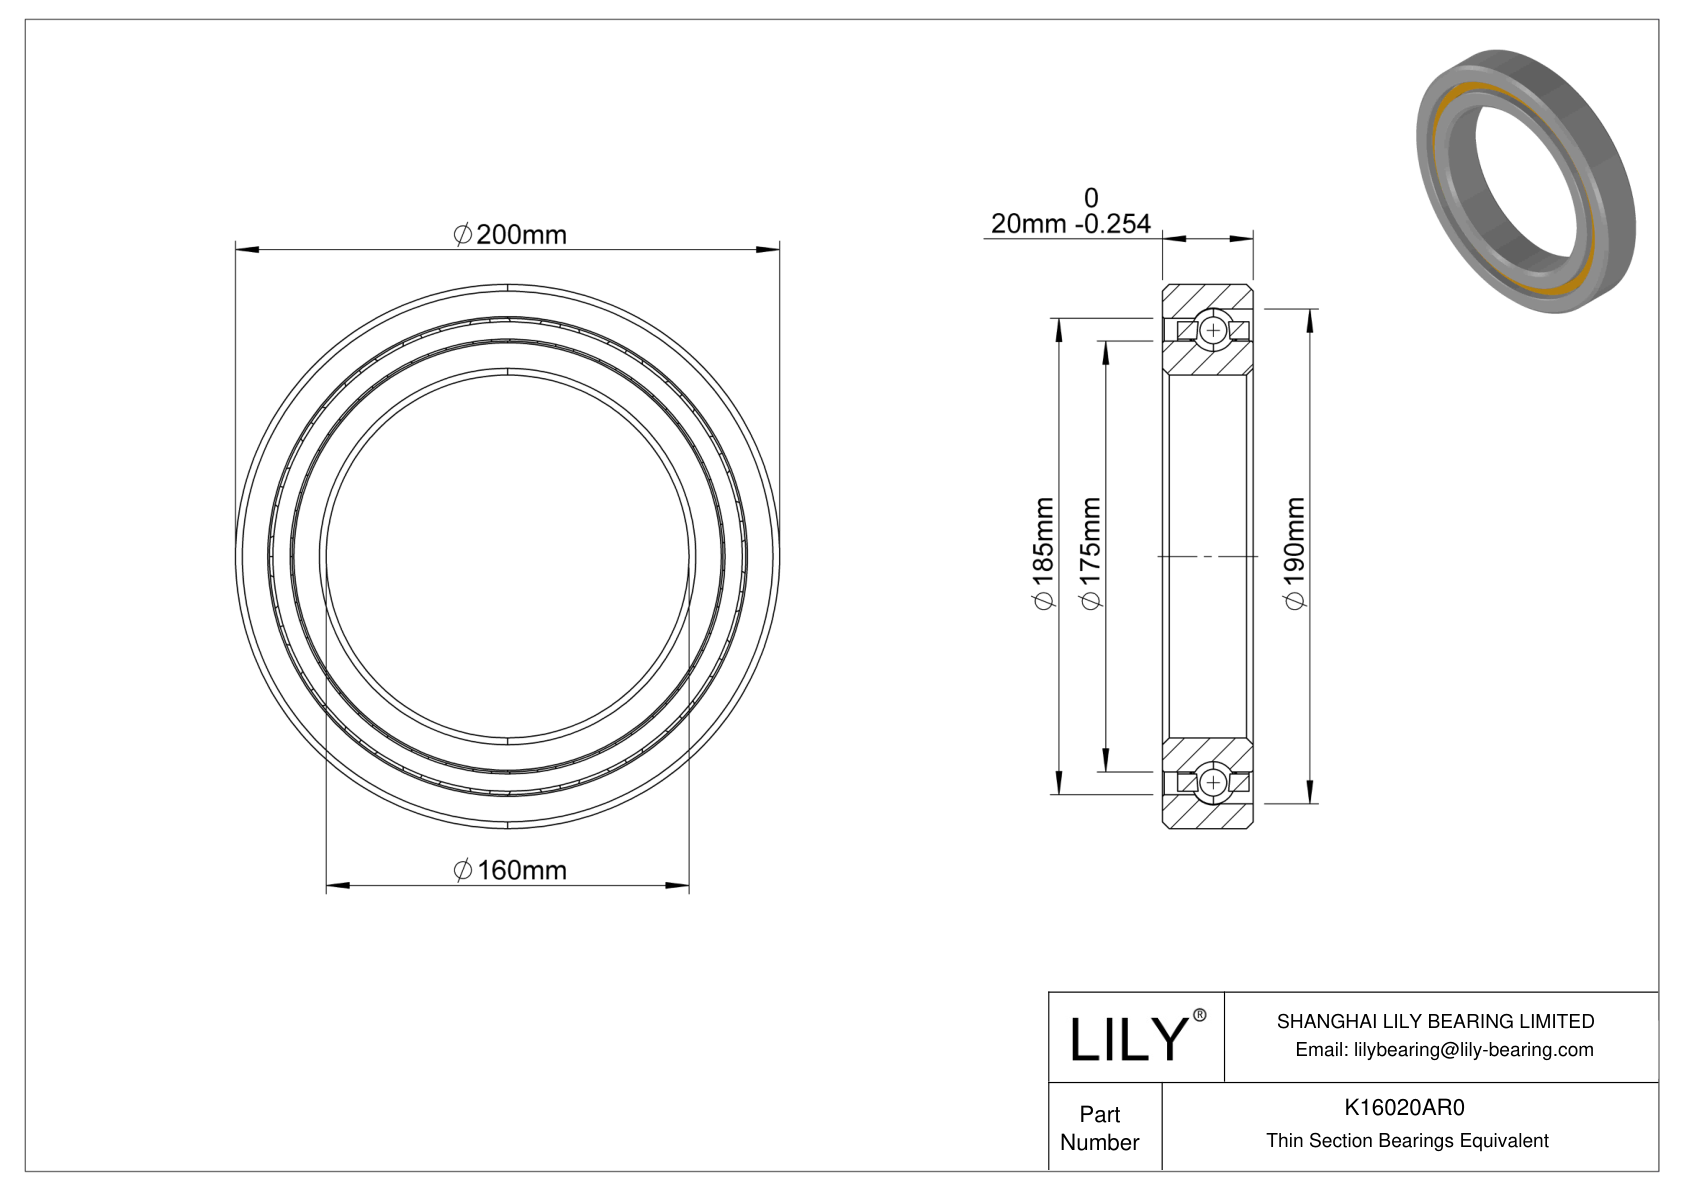 K16020AR0 Constant Section (CS) Bearings cad drawing